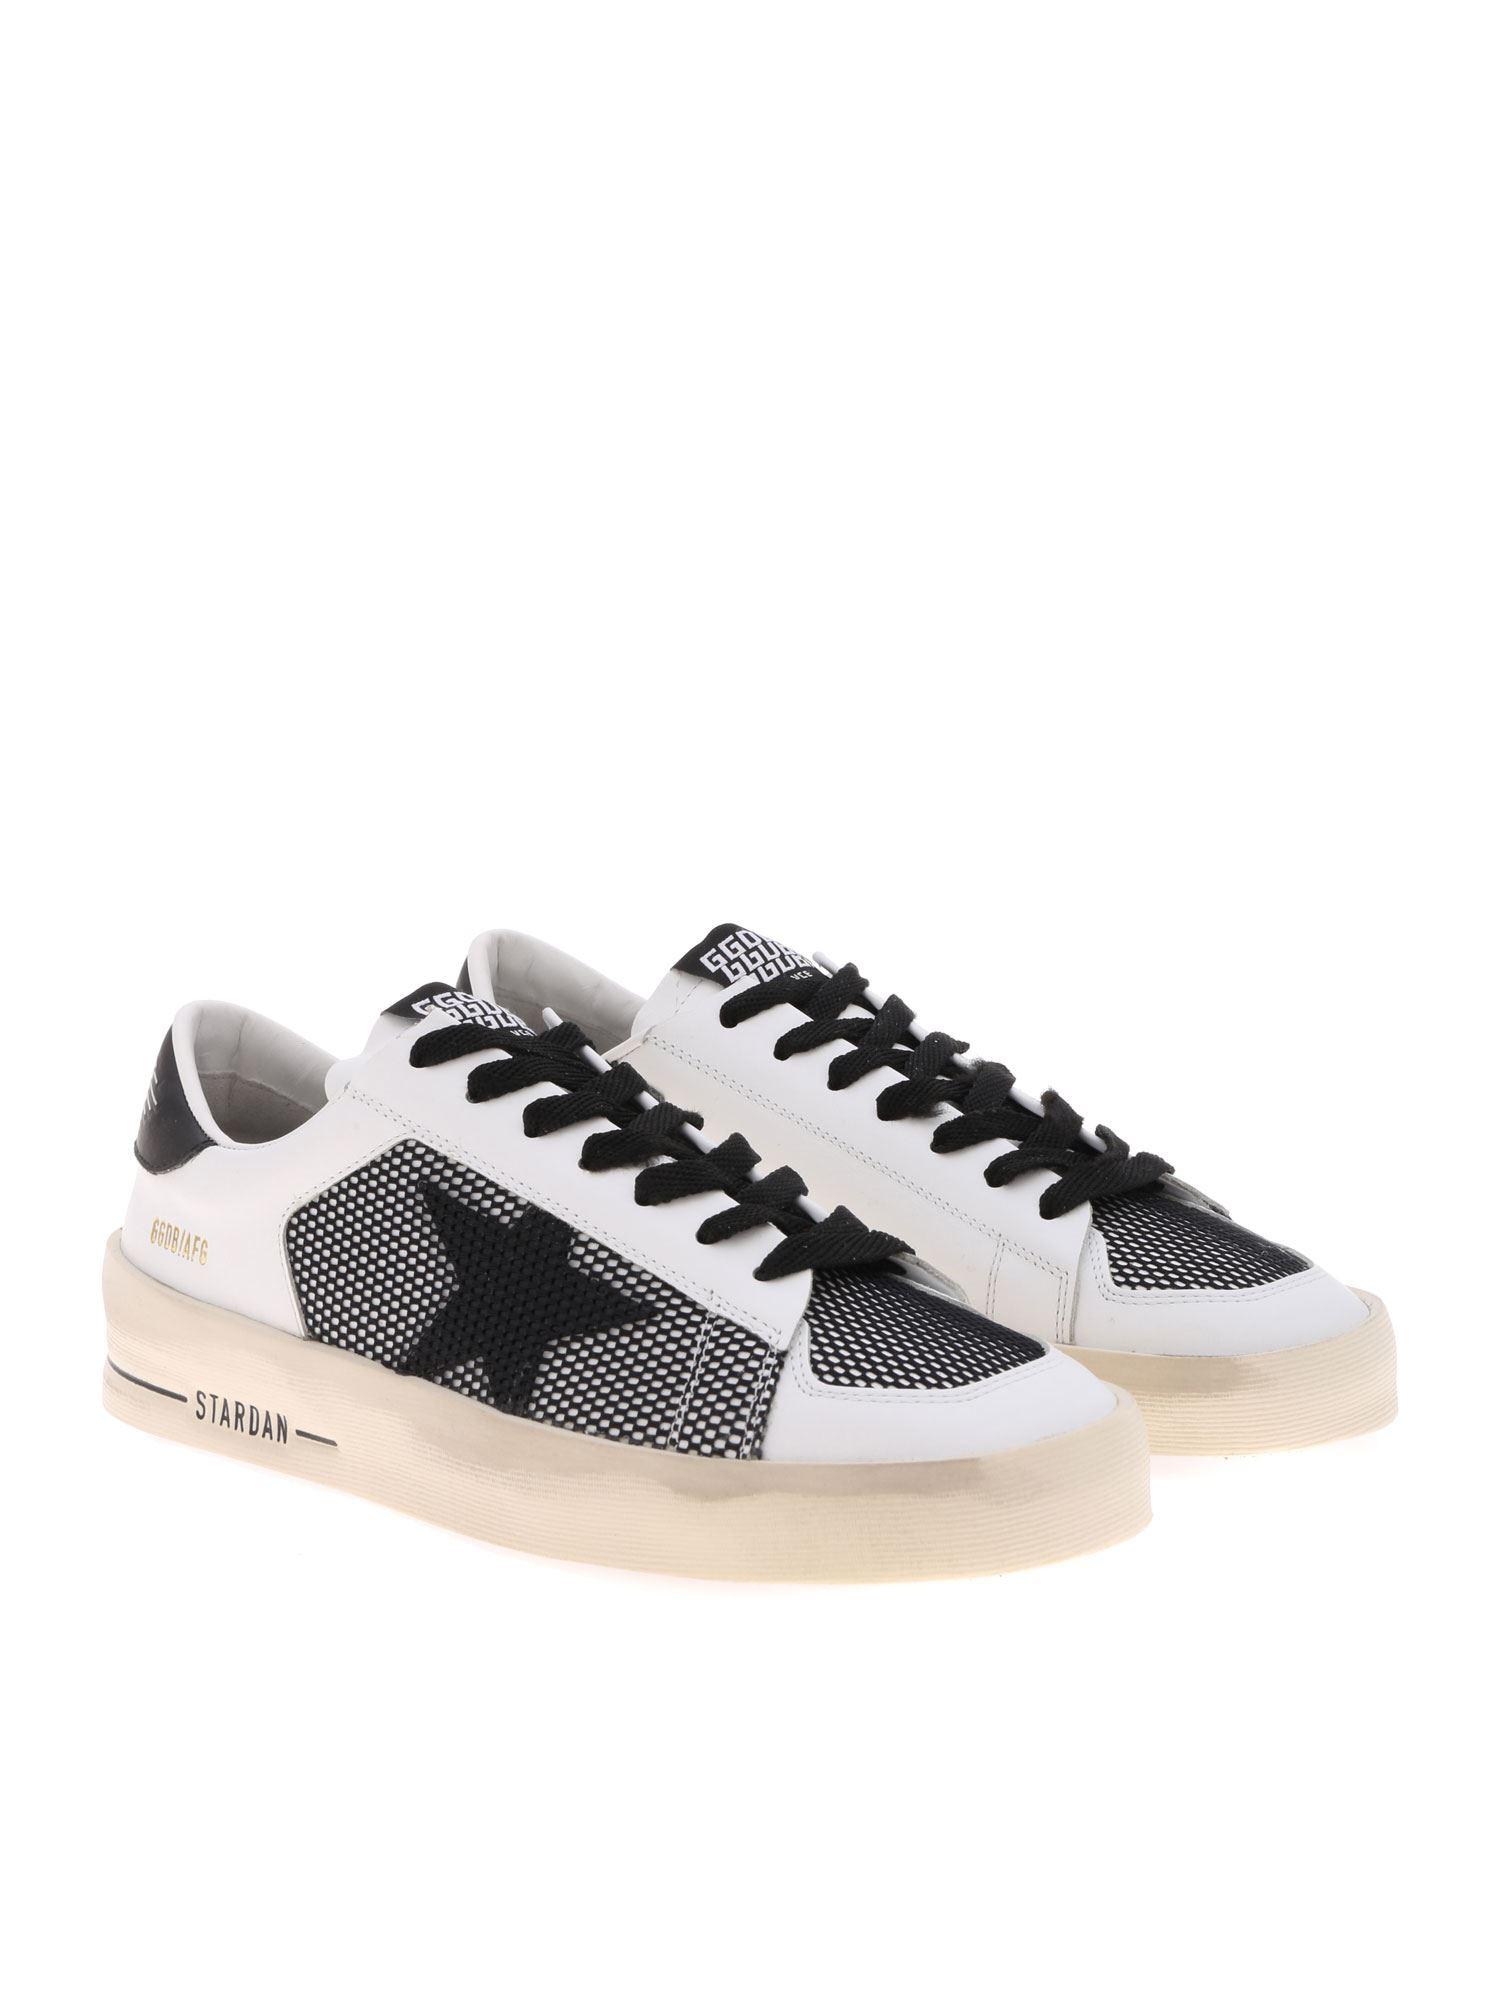 Golden Goose Deluxe Brand Leather Stardan Sneakers In Black And White ...